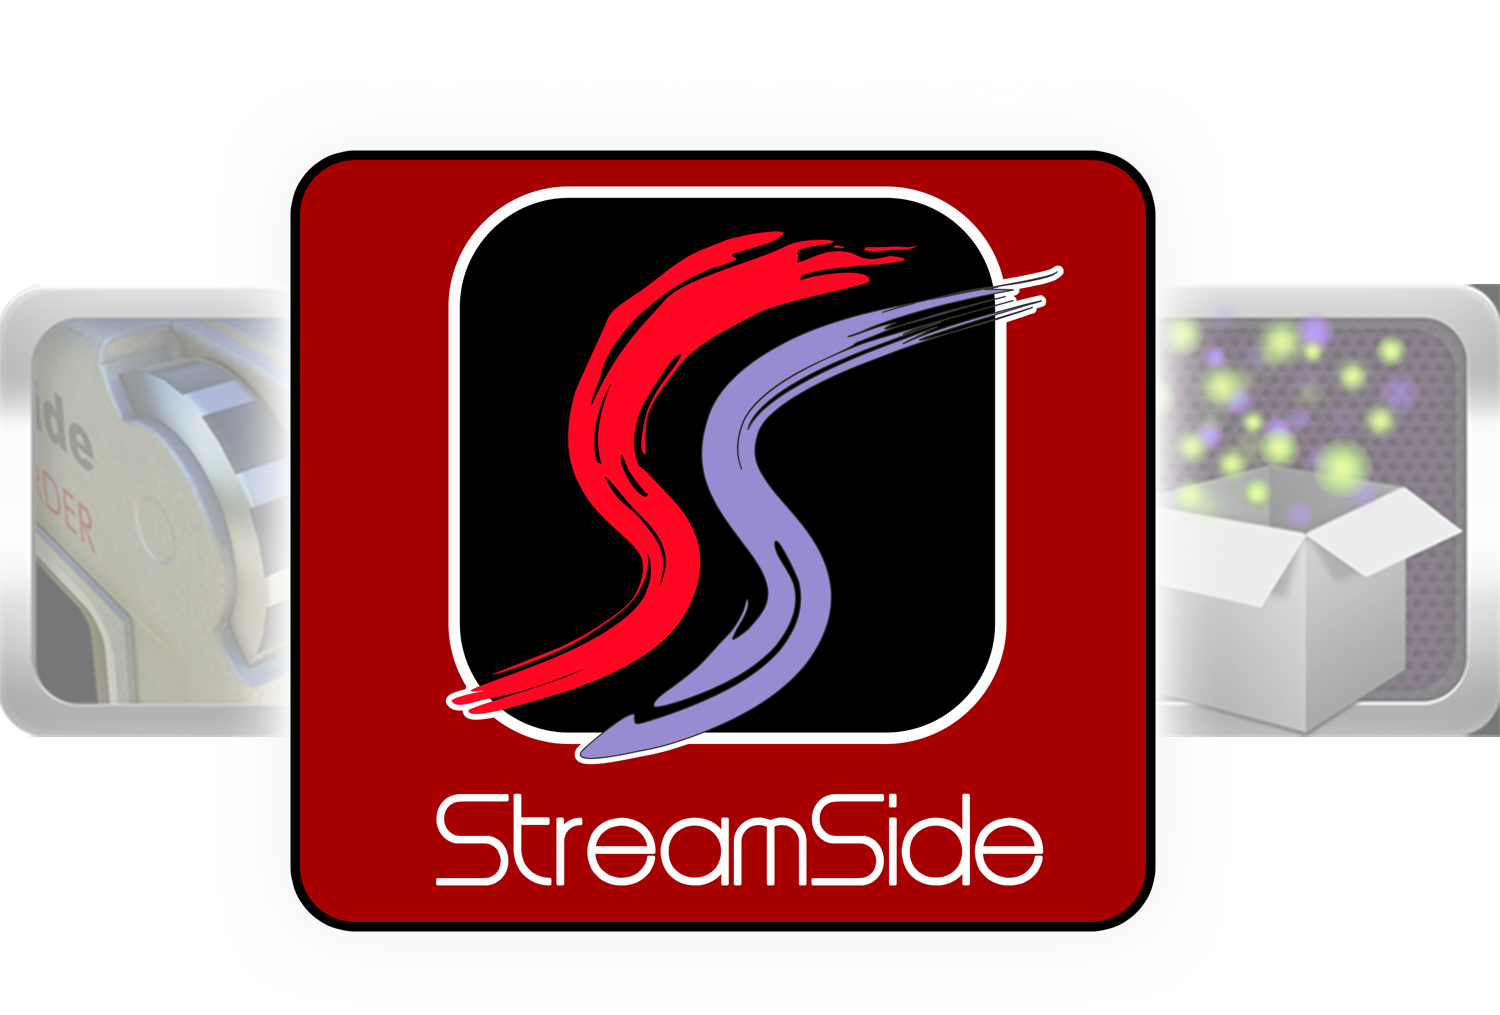 Commemorative Logos for Streamside Software, Spirit Story Box, and the ER70